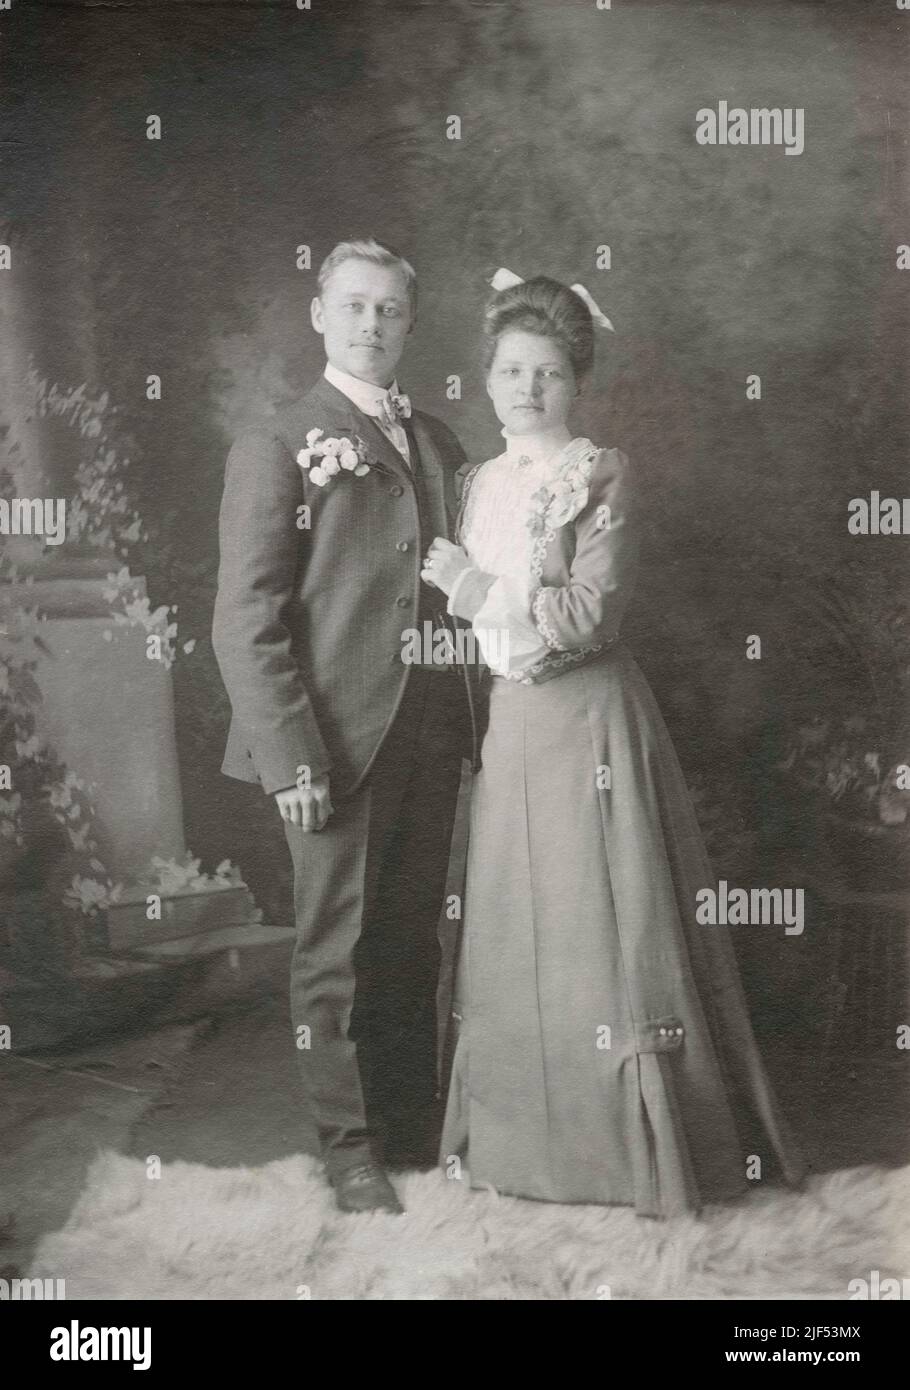 Antique circa 1890s photograph of a young married couple in or near Fitchburg, Massachusetts, USA. The same couple appears unmarried without rings in Alamy photo #2JF53KY. SOURCE: ORIGINAL PHOTOGRAPHIC CABINET CARD Stock Photo